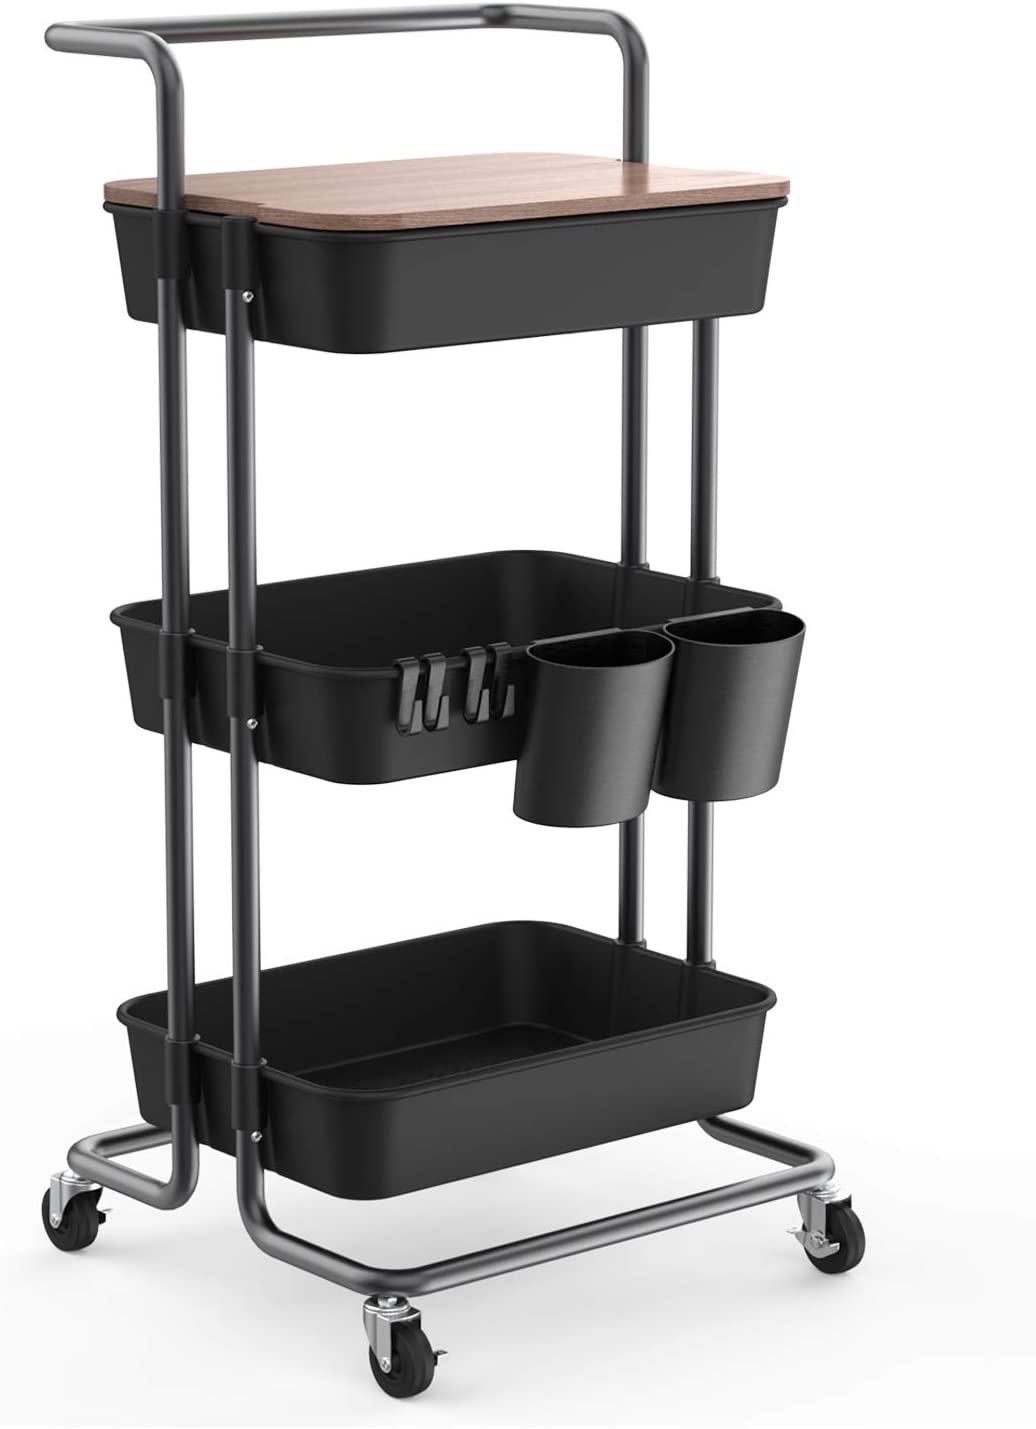 Utility Rolling Cart with Cover Board Price Drop With Code on Amazon!